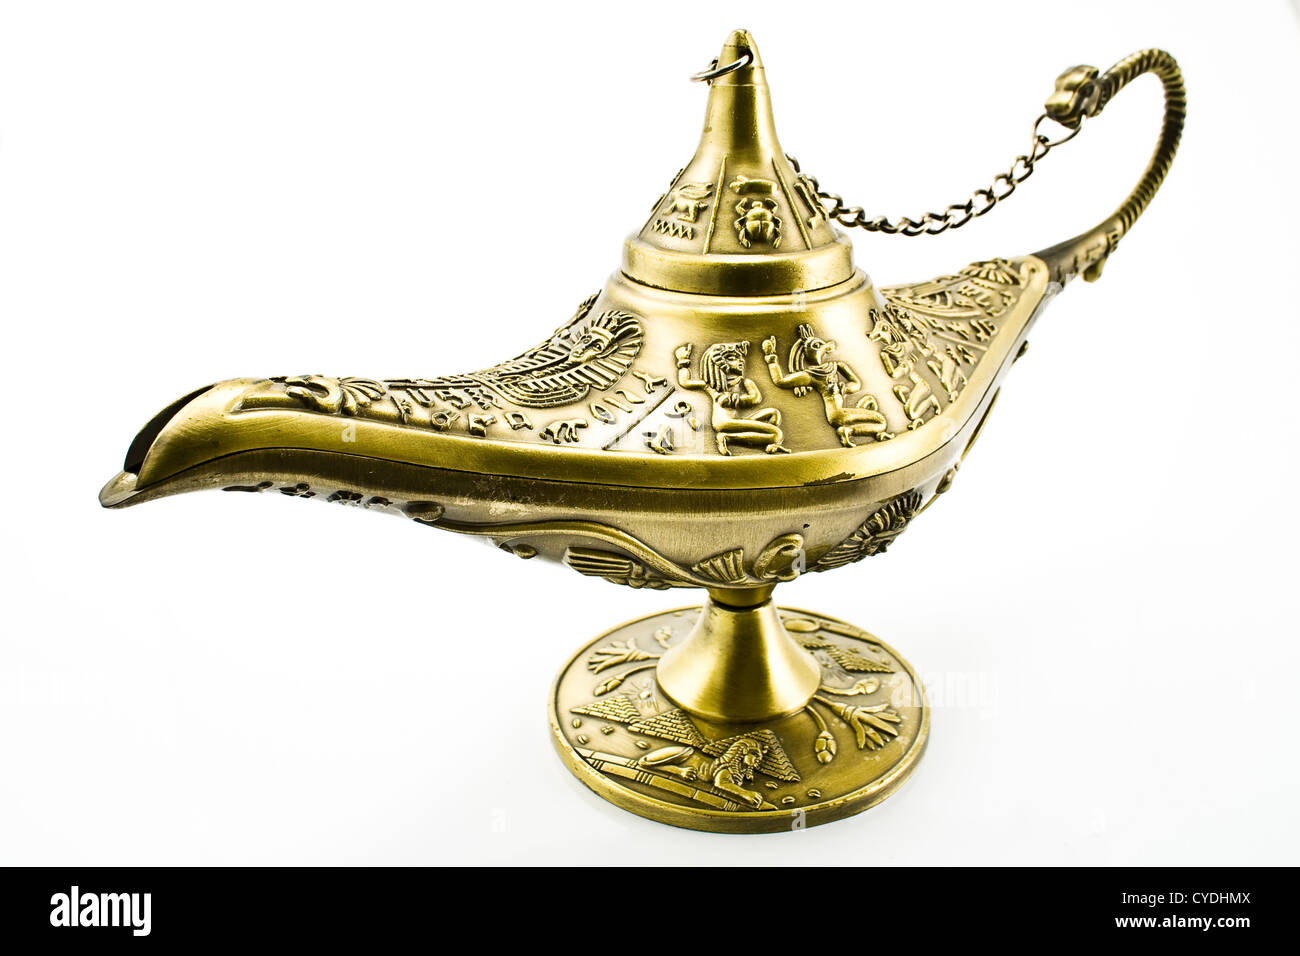 700 Aladin Genie Oil Brass Images, Stock Photos, 3D objects